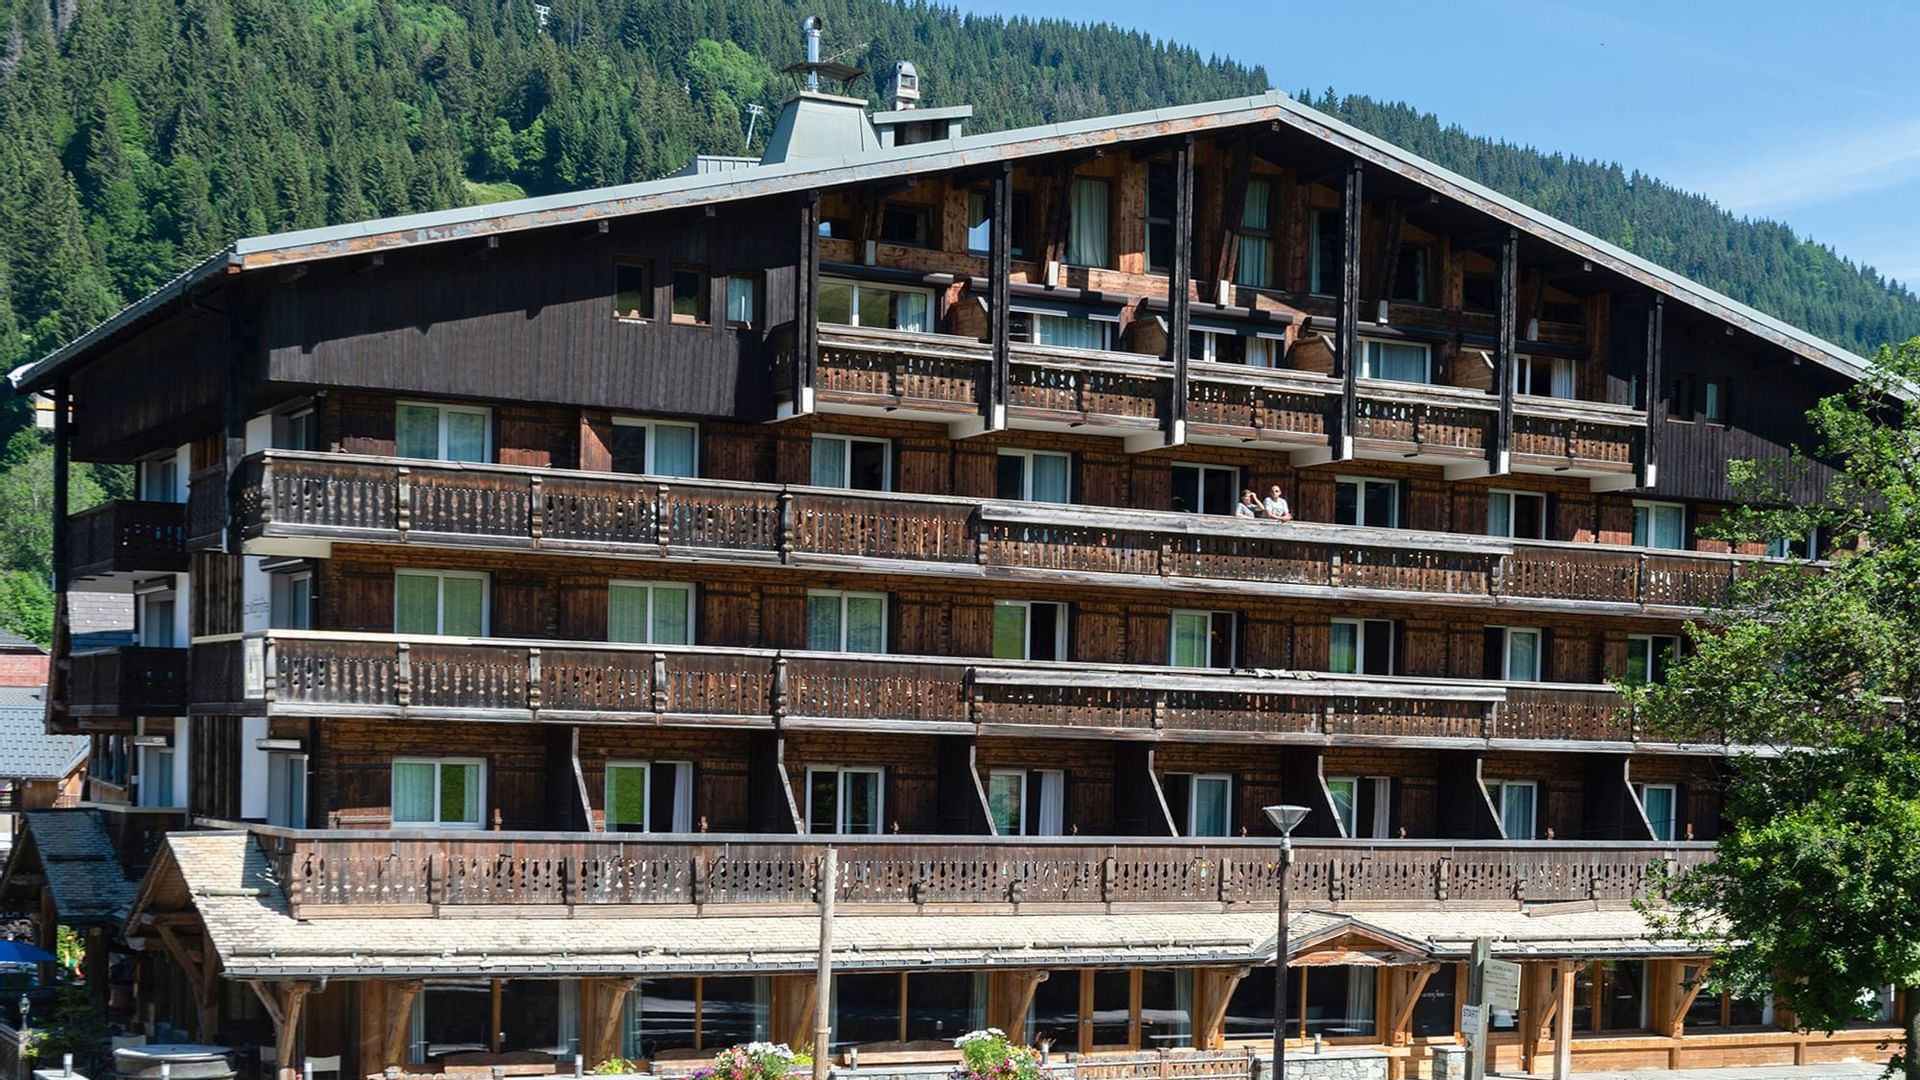 Outer view of Chalet-Hotel La Marmotte building at daylight 